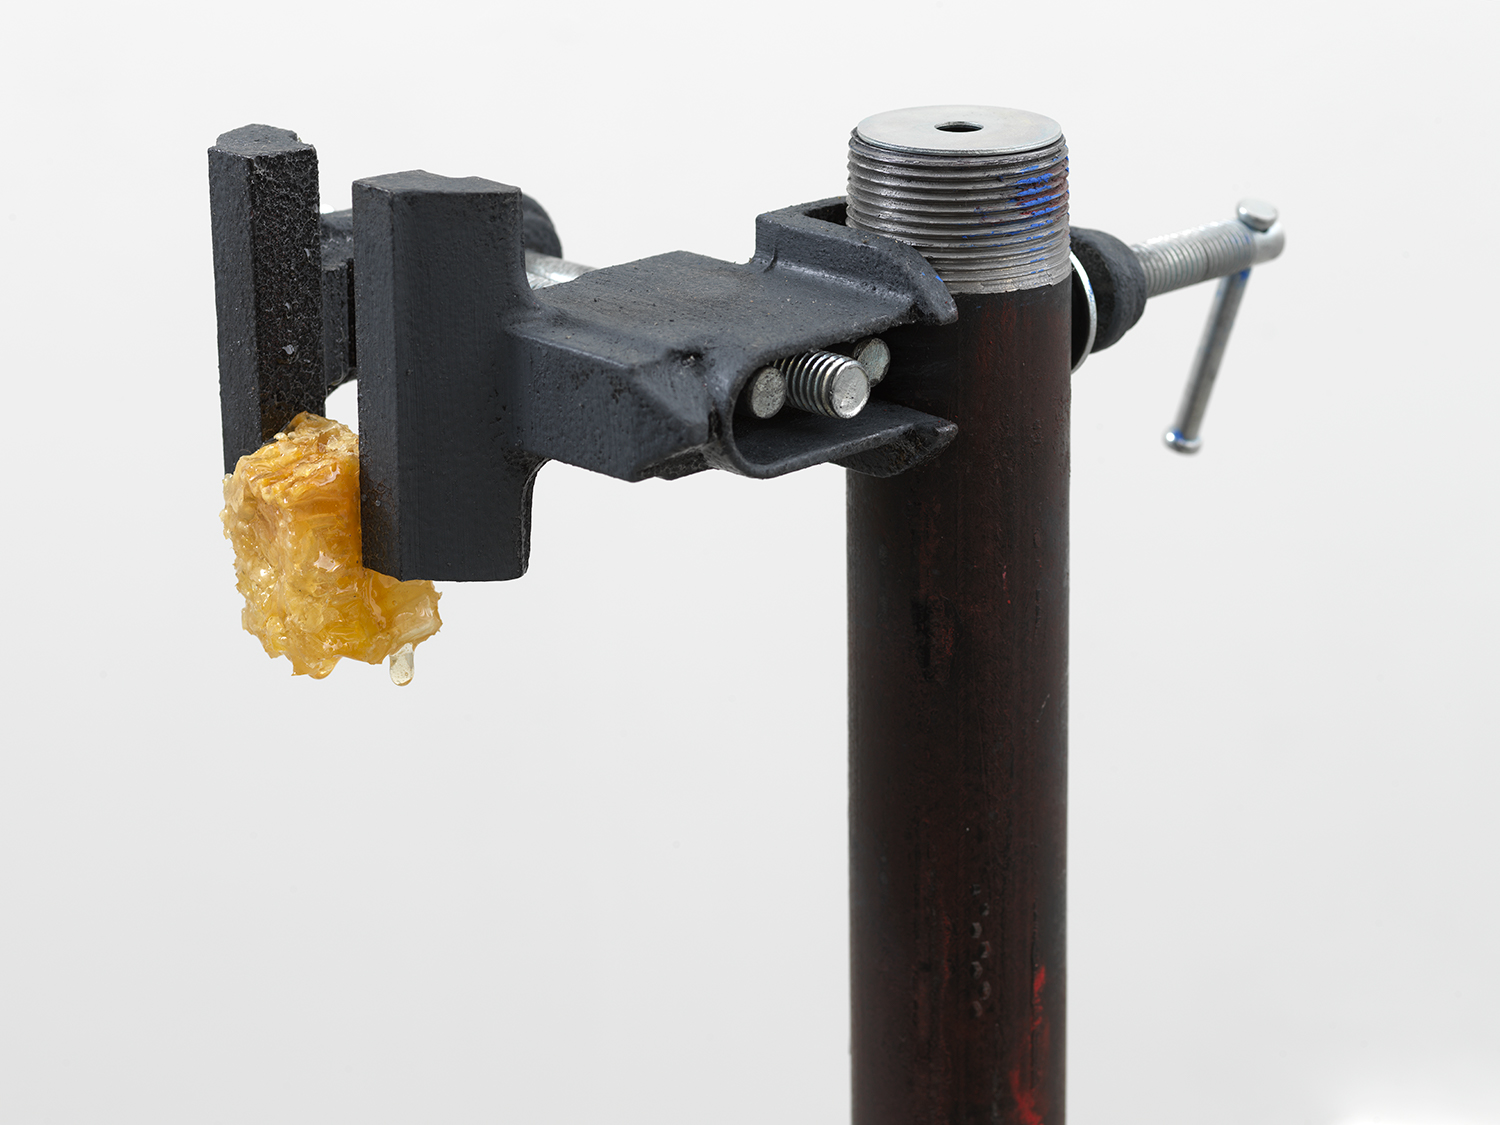 Photo of sculpture detailing honey-drip from vice